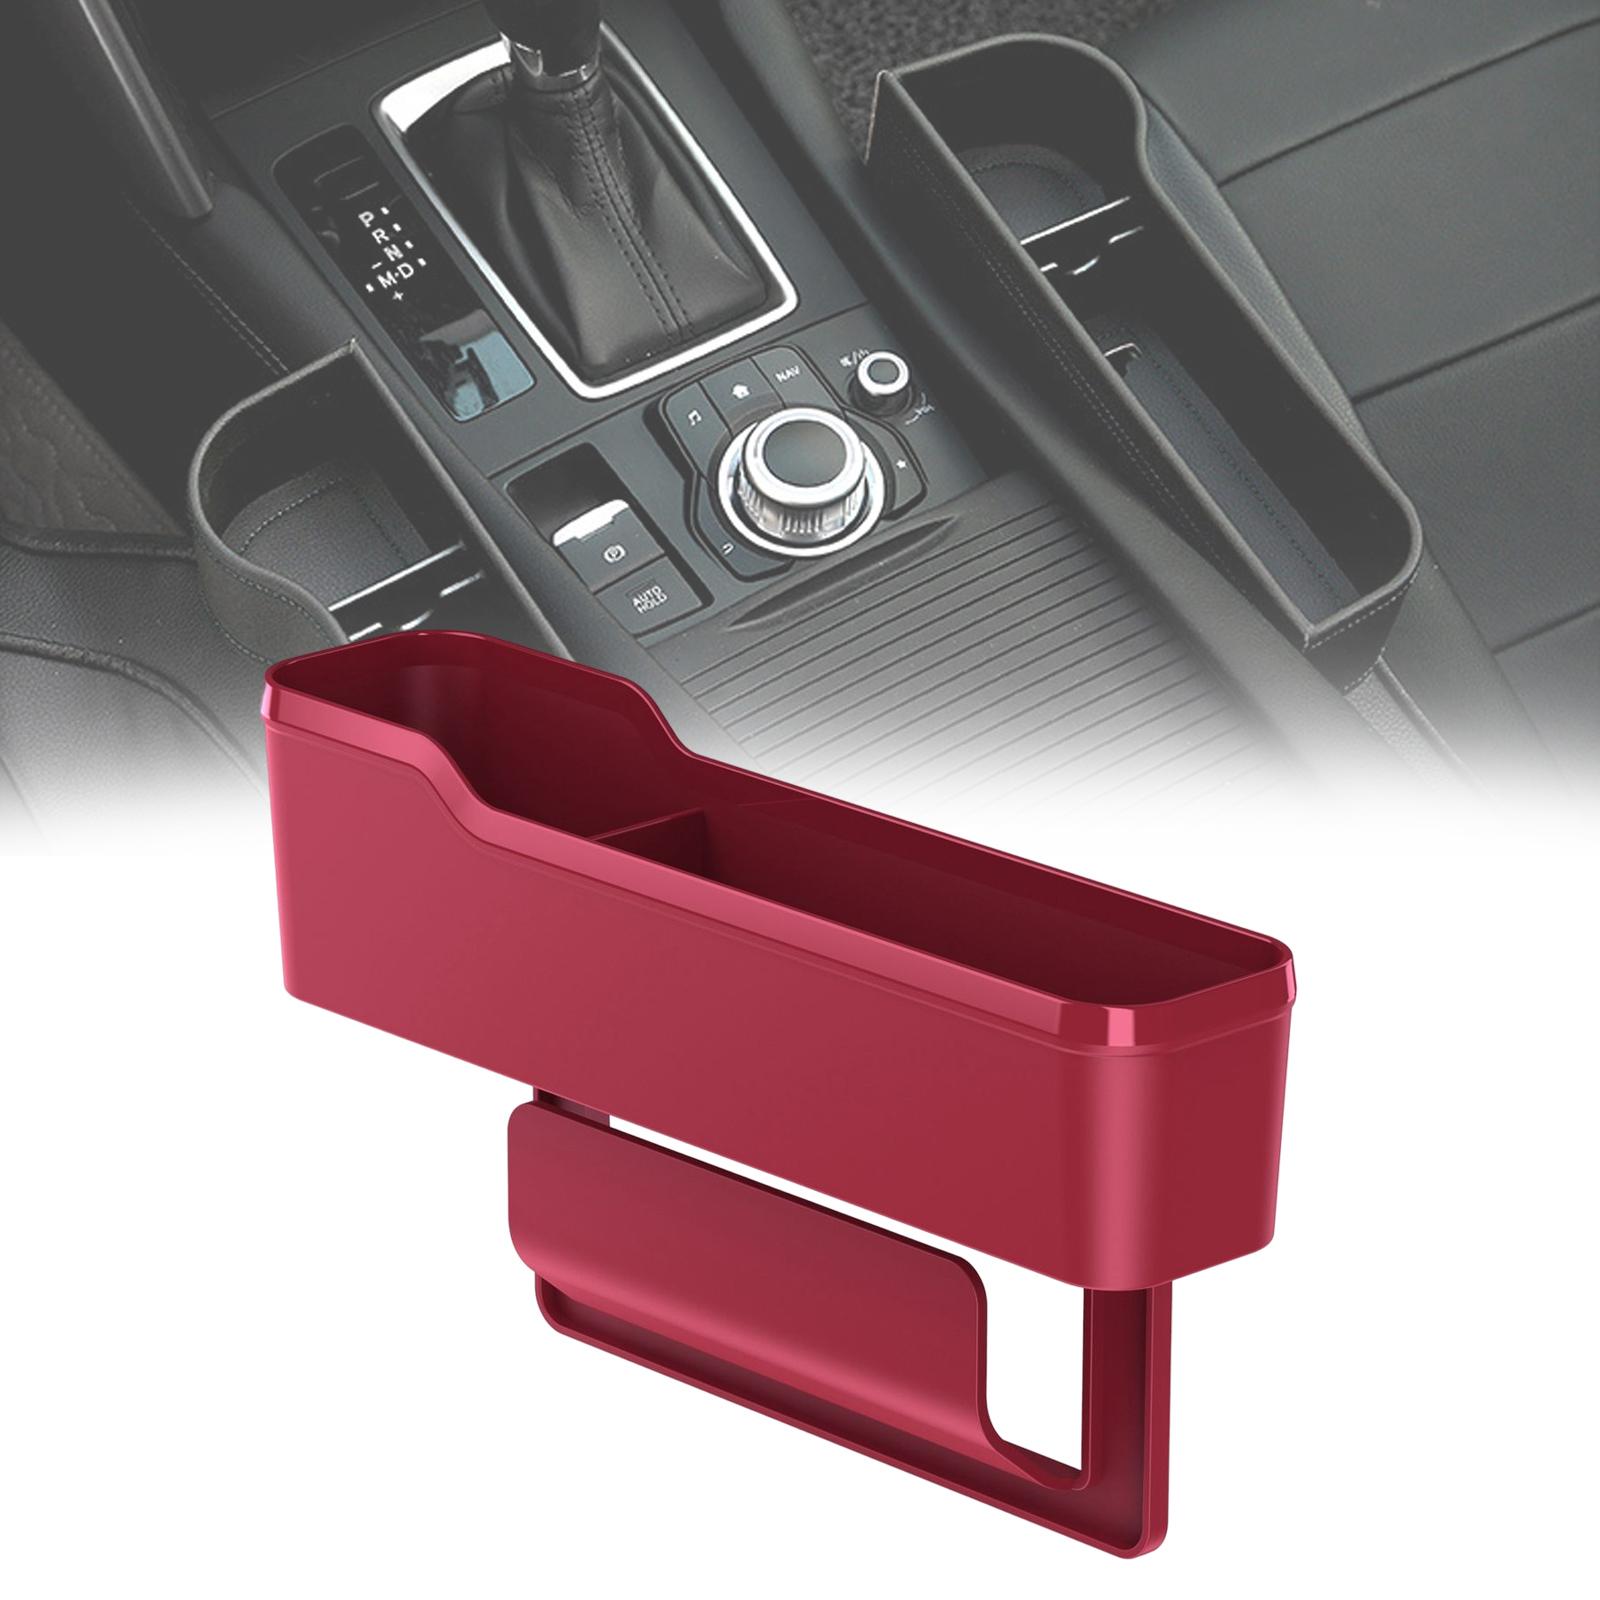 Car Interior Seat Gap Organizer with Cup Holder Accessory for Holding Phone Long Red